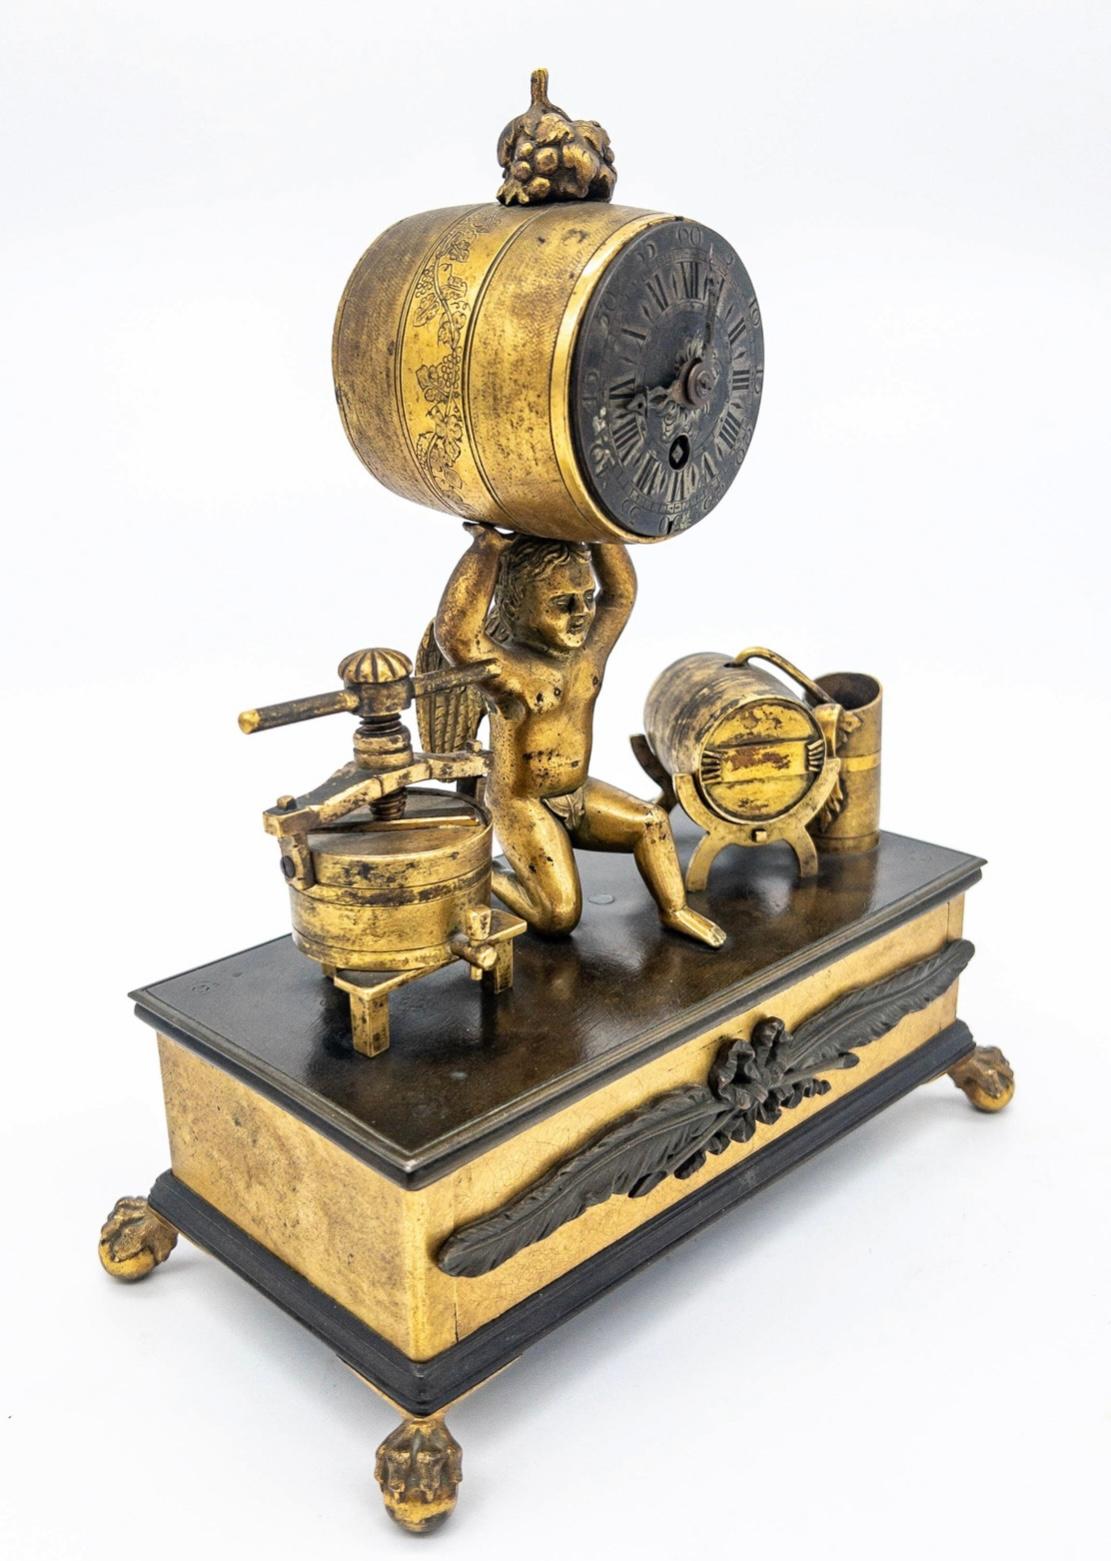 A charming desk clock in the form of a cherub holding a barrel form clock with silver face, flanked by wine press and still, the base concealing a desk set with two glass bottles and silver caps.  The clock is overwound, but appears to be in good